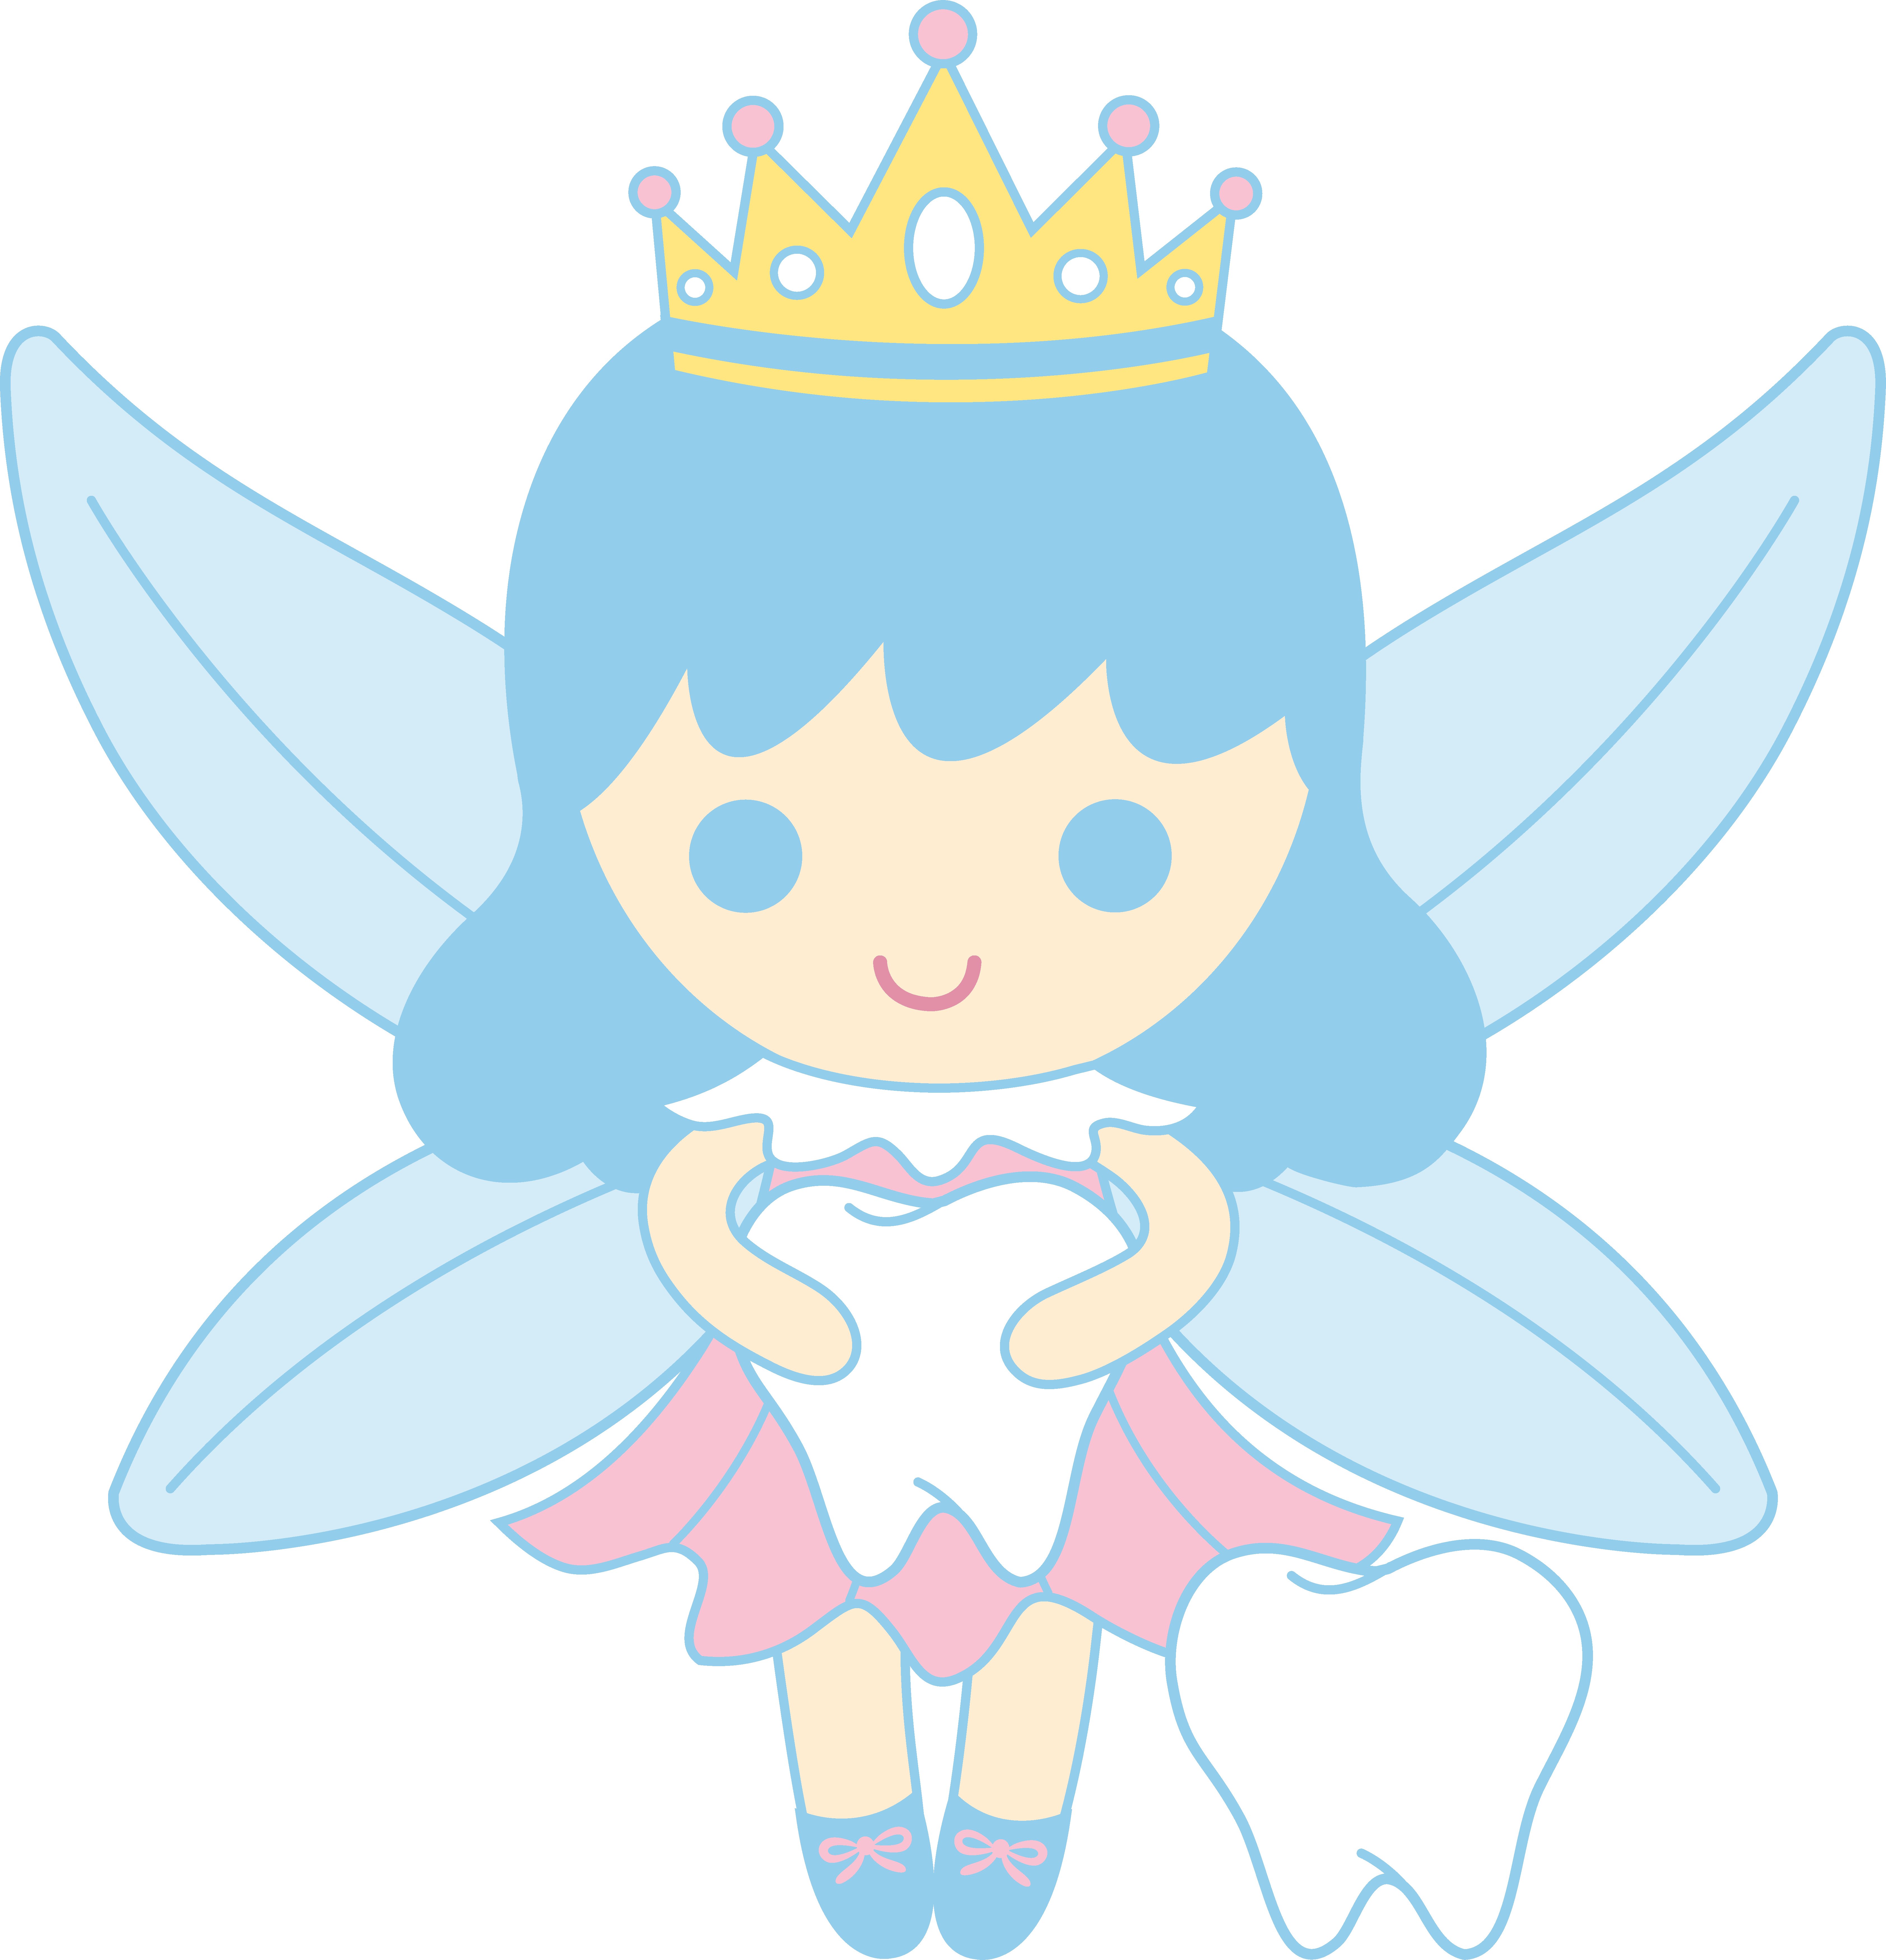 Cute Tooth Fairy Collecting Teeth.